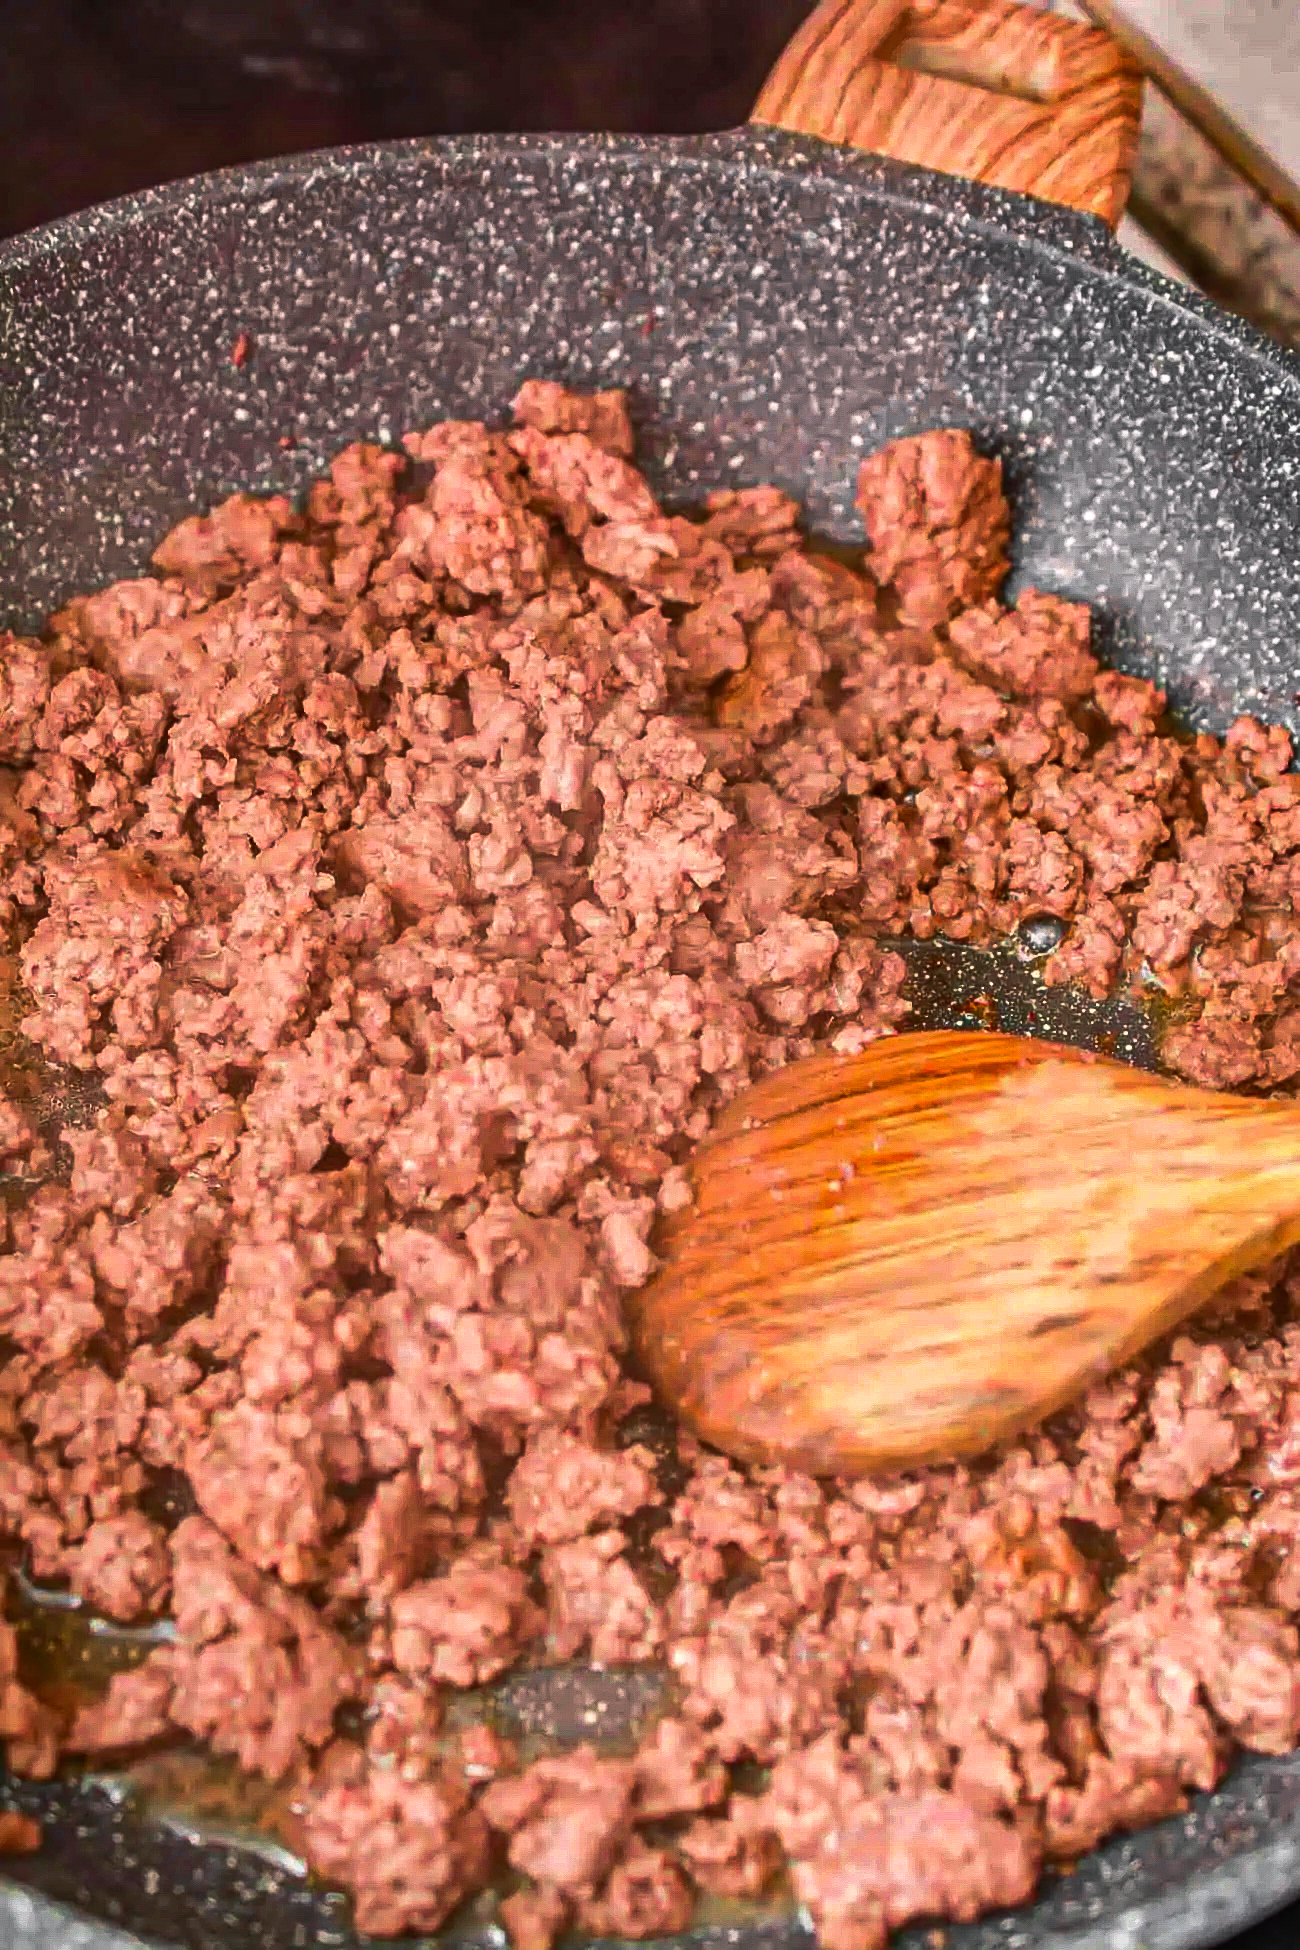 Saute the ground beef in a skillet over medium-high heat on the stove until it is completely browned. Drain any excess grease.